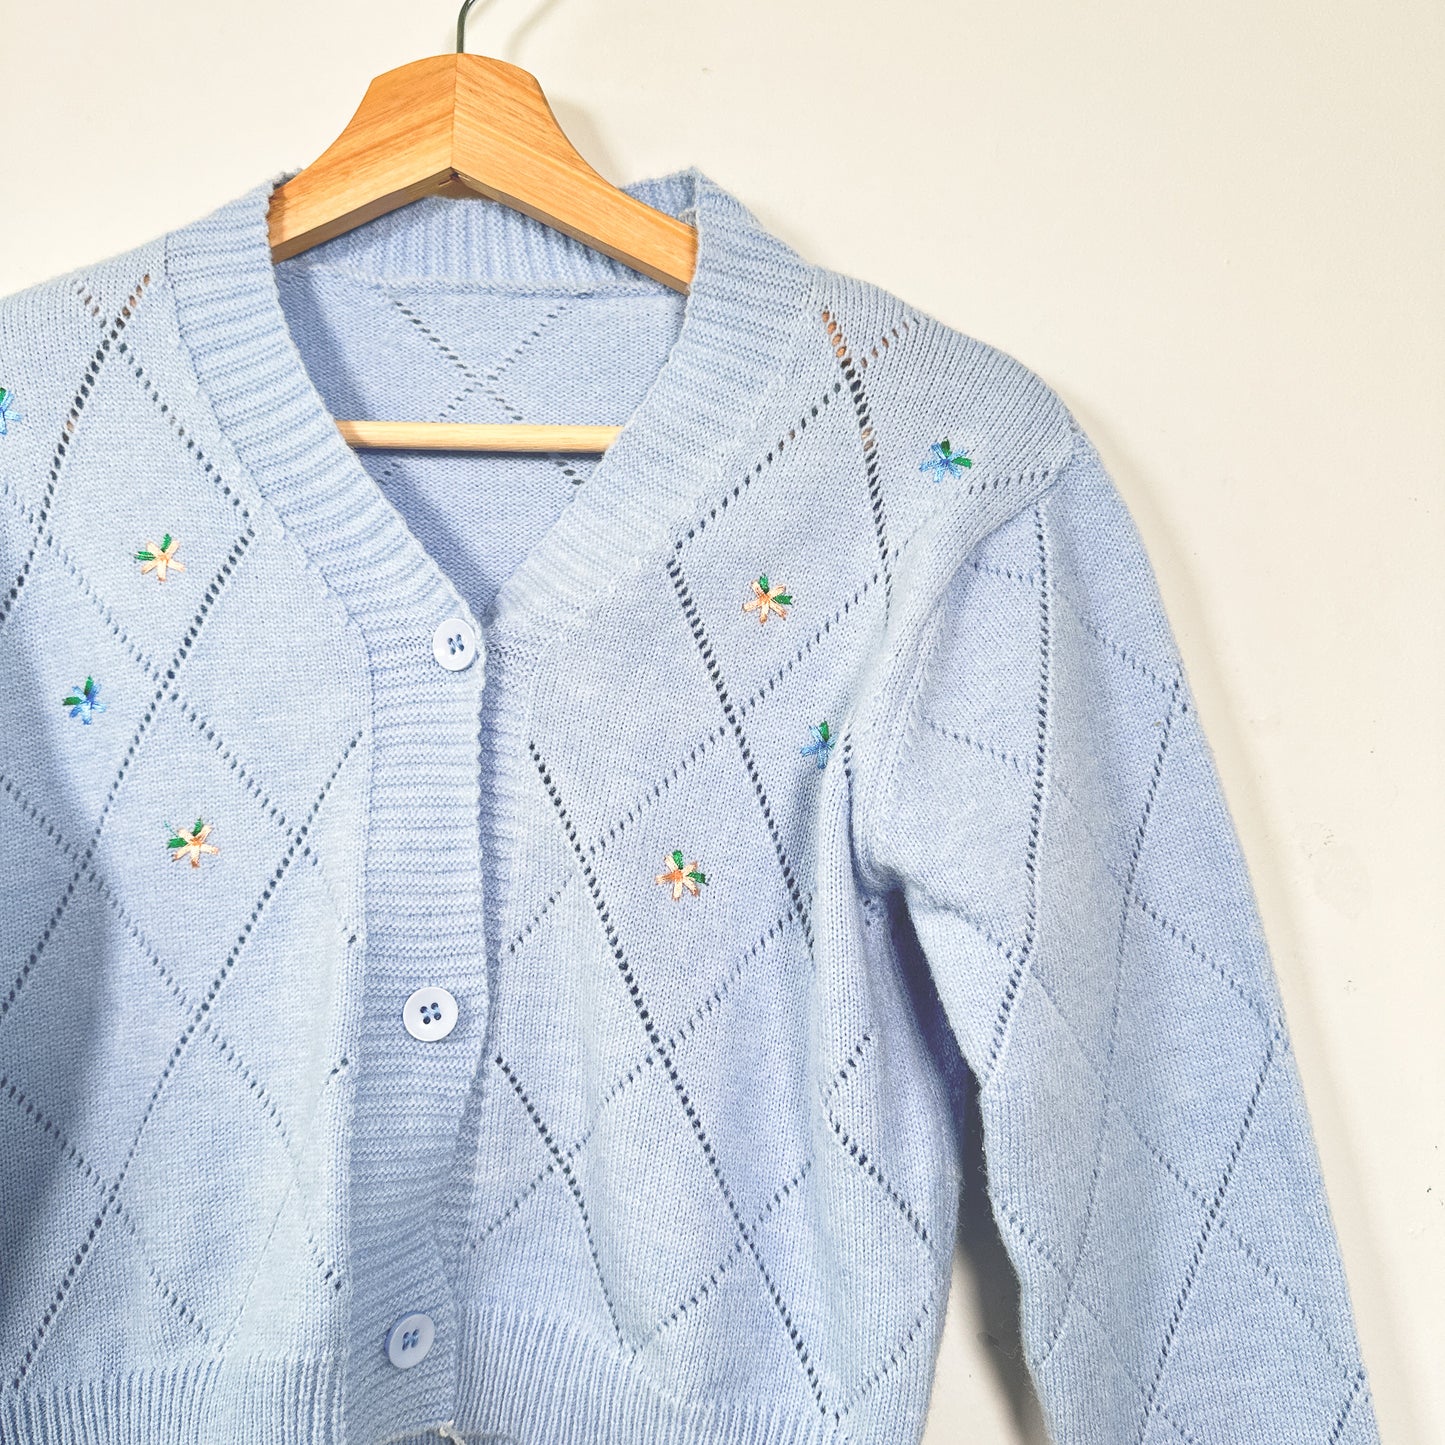 Vintage Kids Cropped Blue Cardigan with Embroidered Flowers - Size 8-10yr